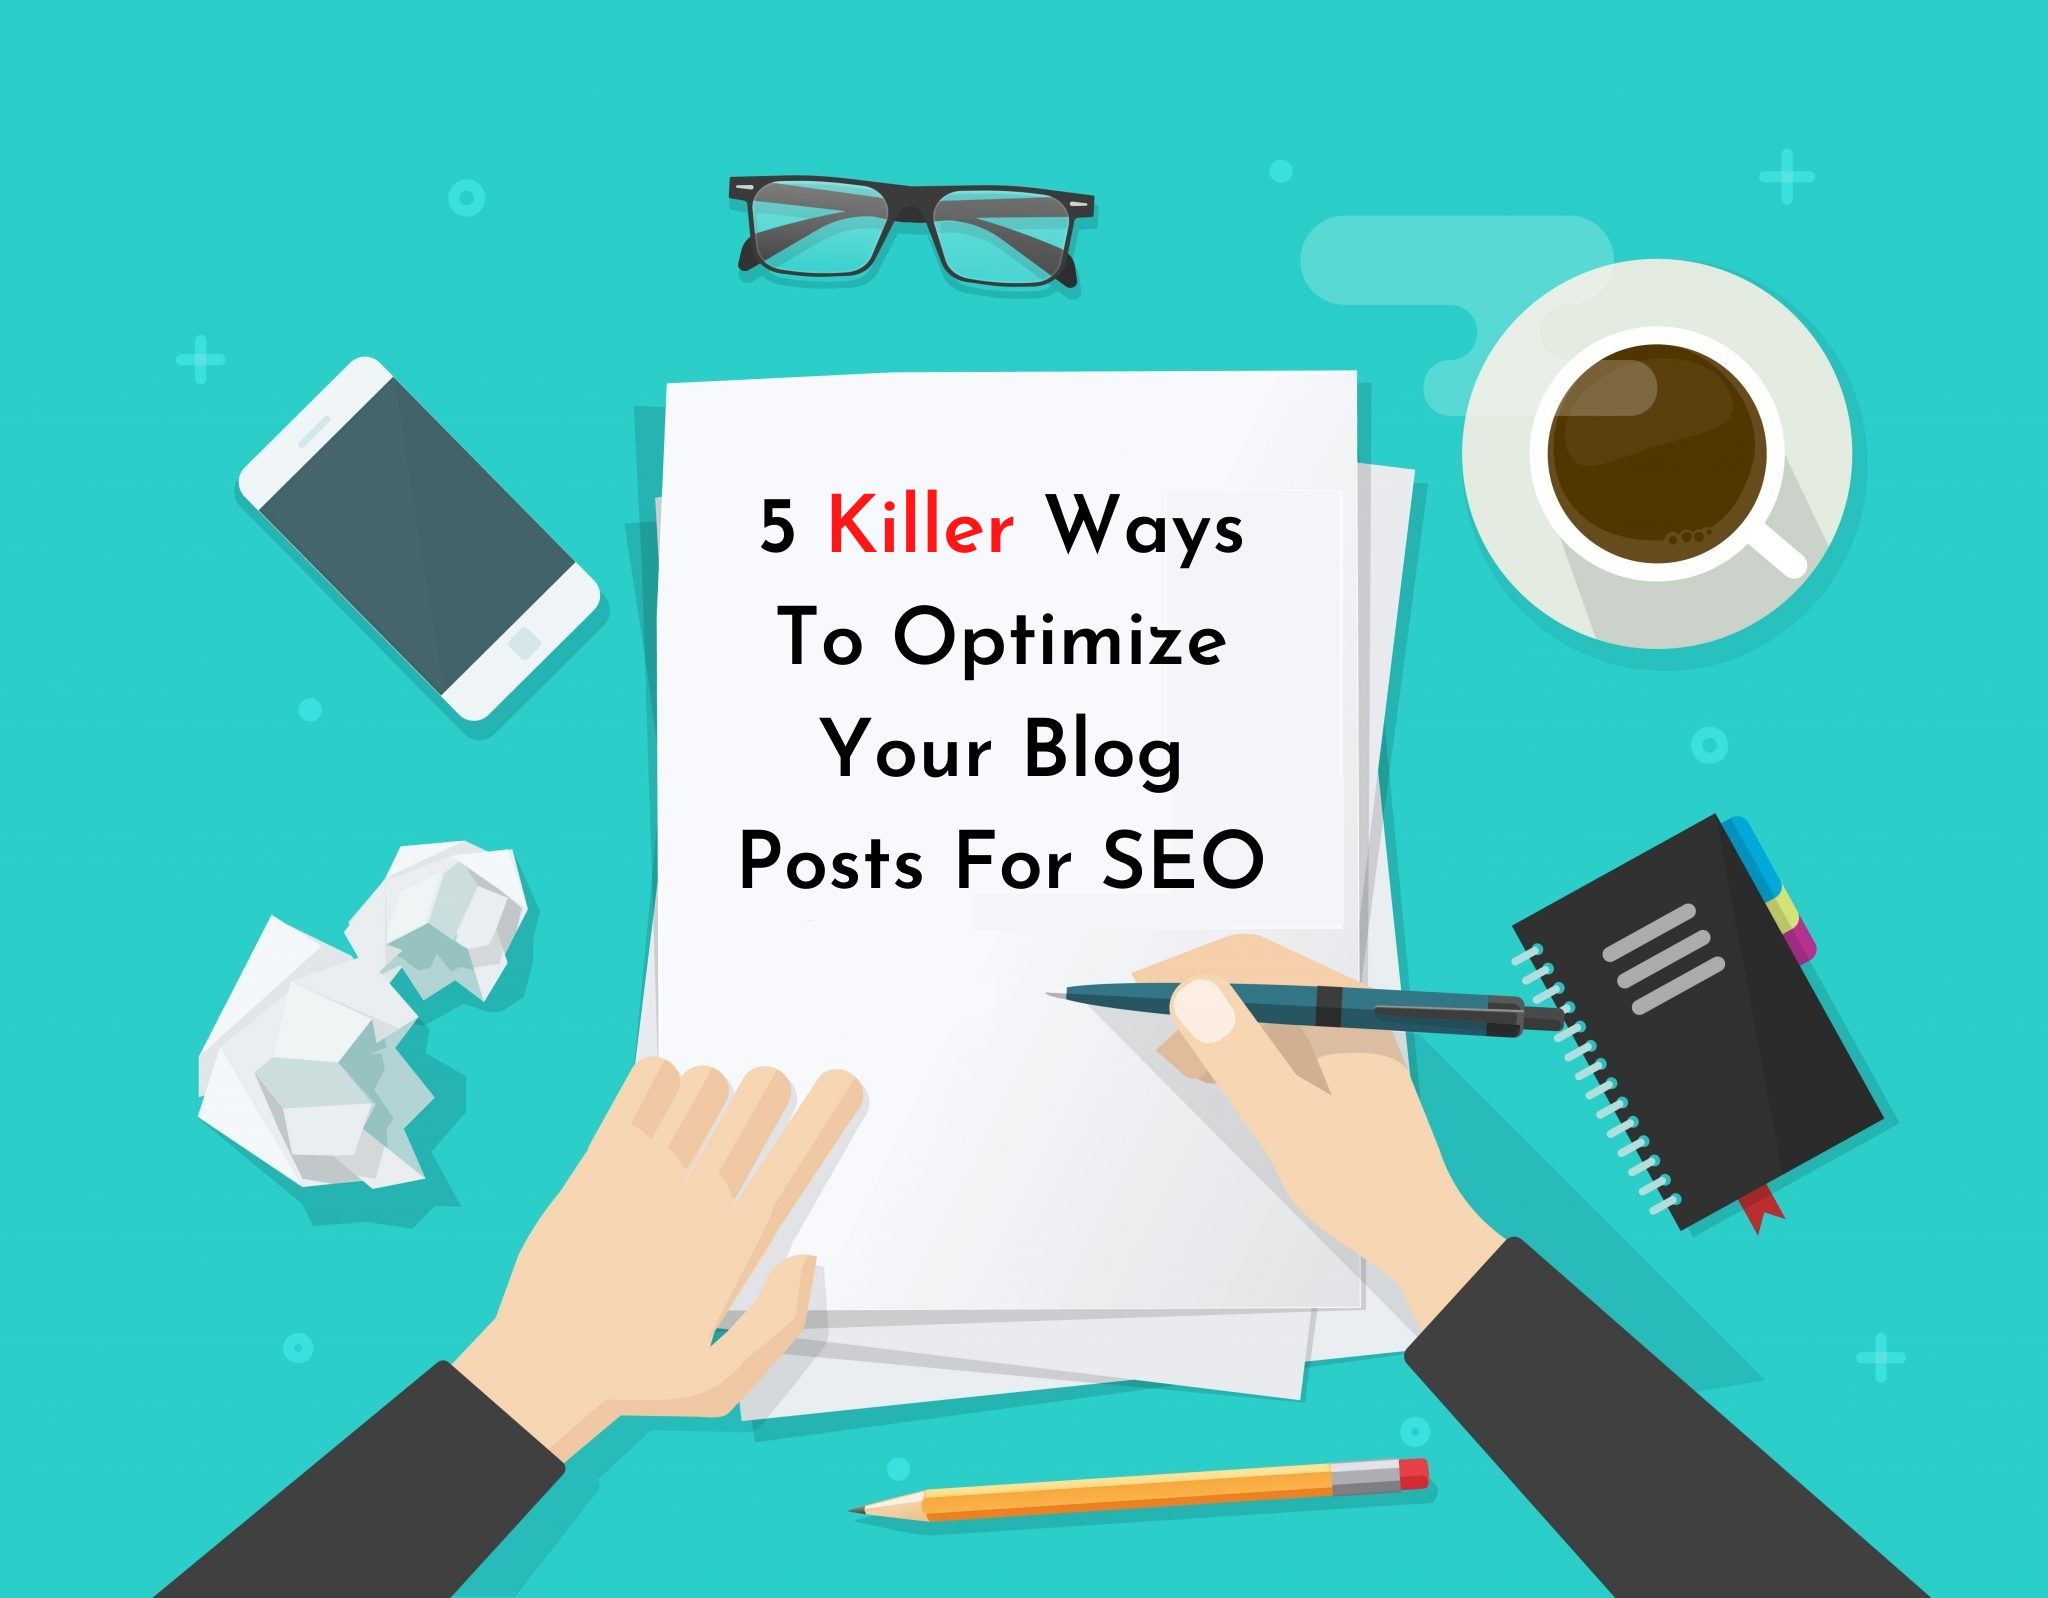 5 Killer Ways To Optimize Your Blog Posts For SEO